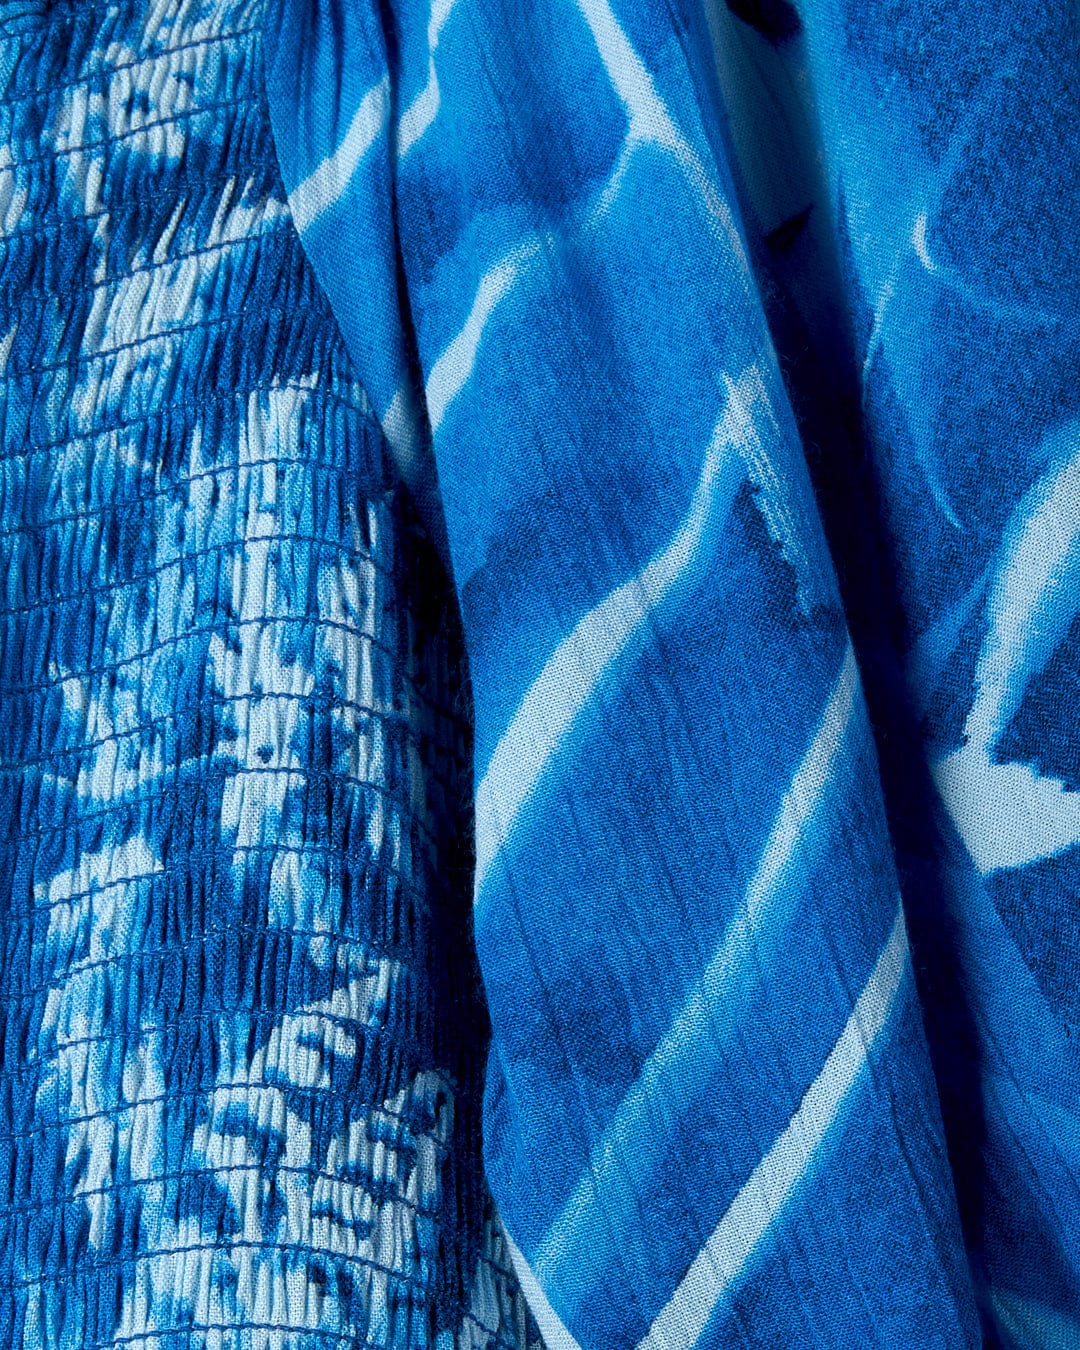 Close-up of a blue fabric with white patterns, featuring an abstract floral pattern and a mix of smooth and textured surfaces. The fabric is from the Larran Cyanotype - Midi Woven Dress - Blue by Saltrock.